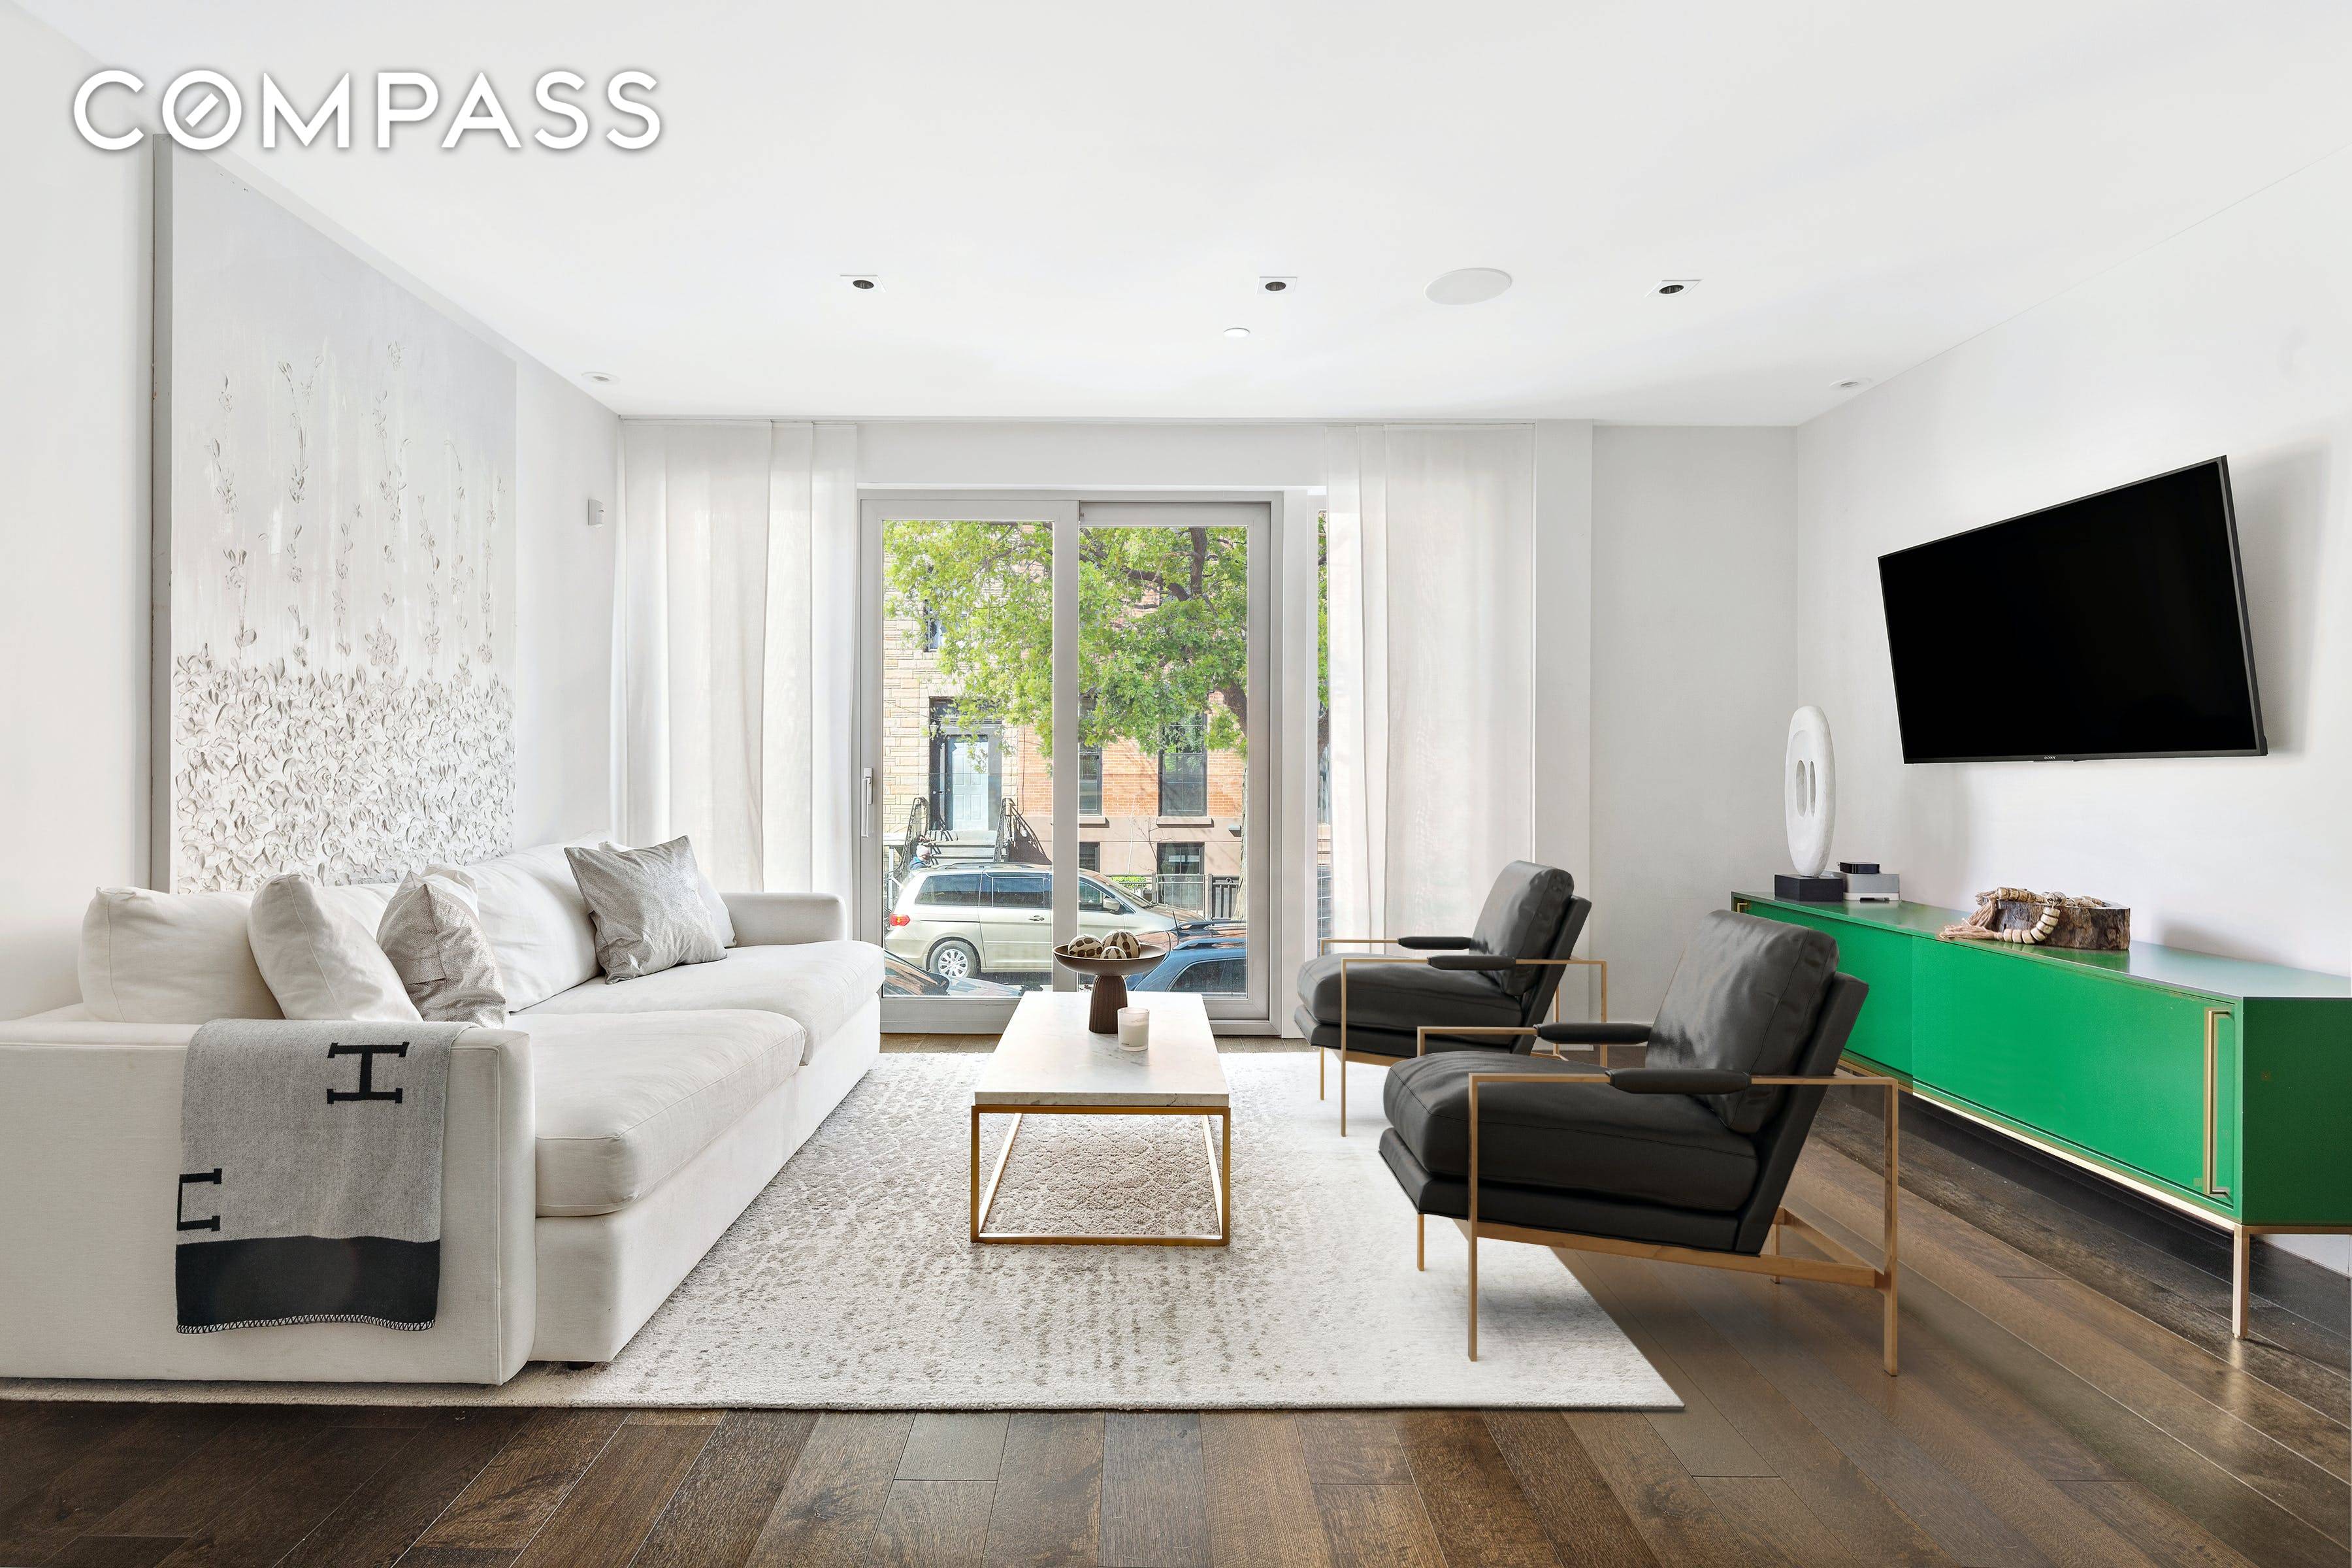 From its striking street presence to its beautifully landscaped private backyard, 78 South 3rd Street encompasses both stunning design and charming Brooklyn living.